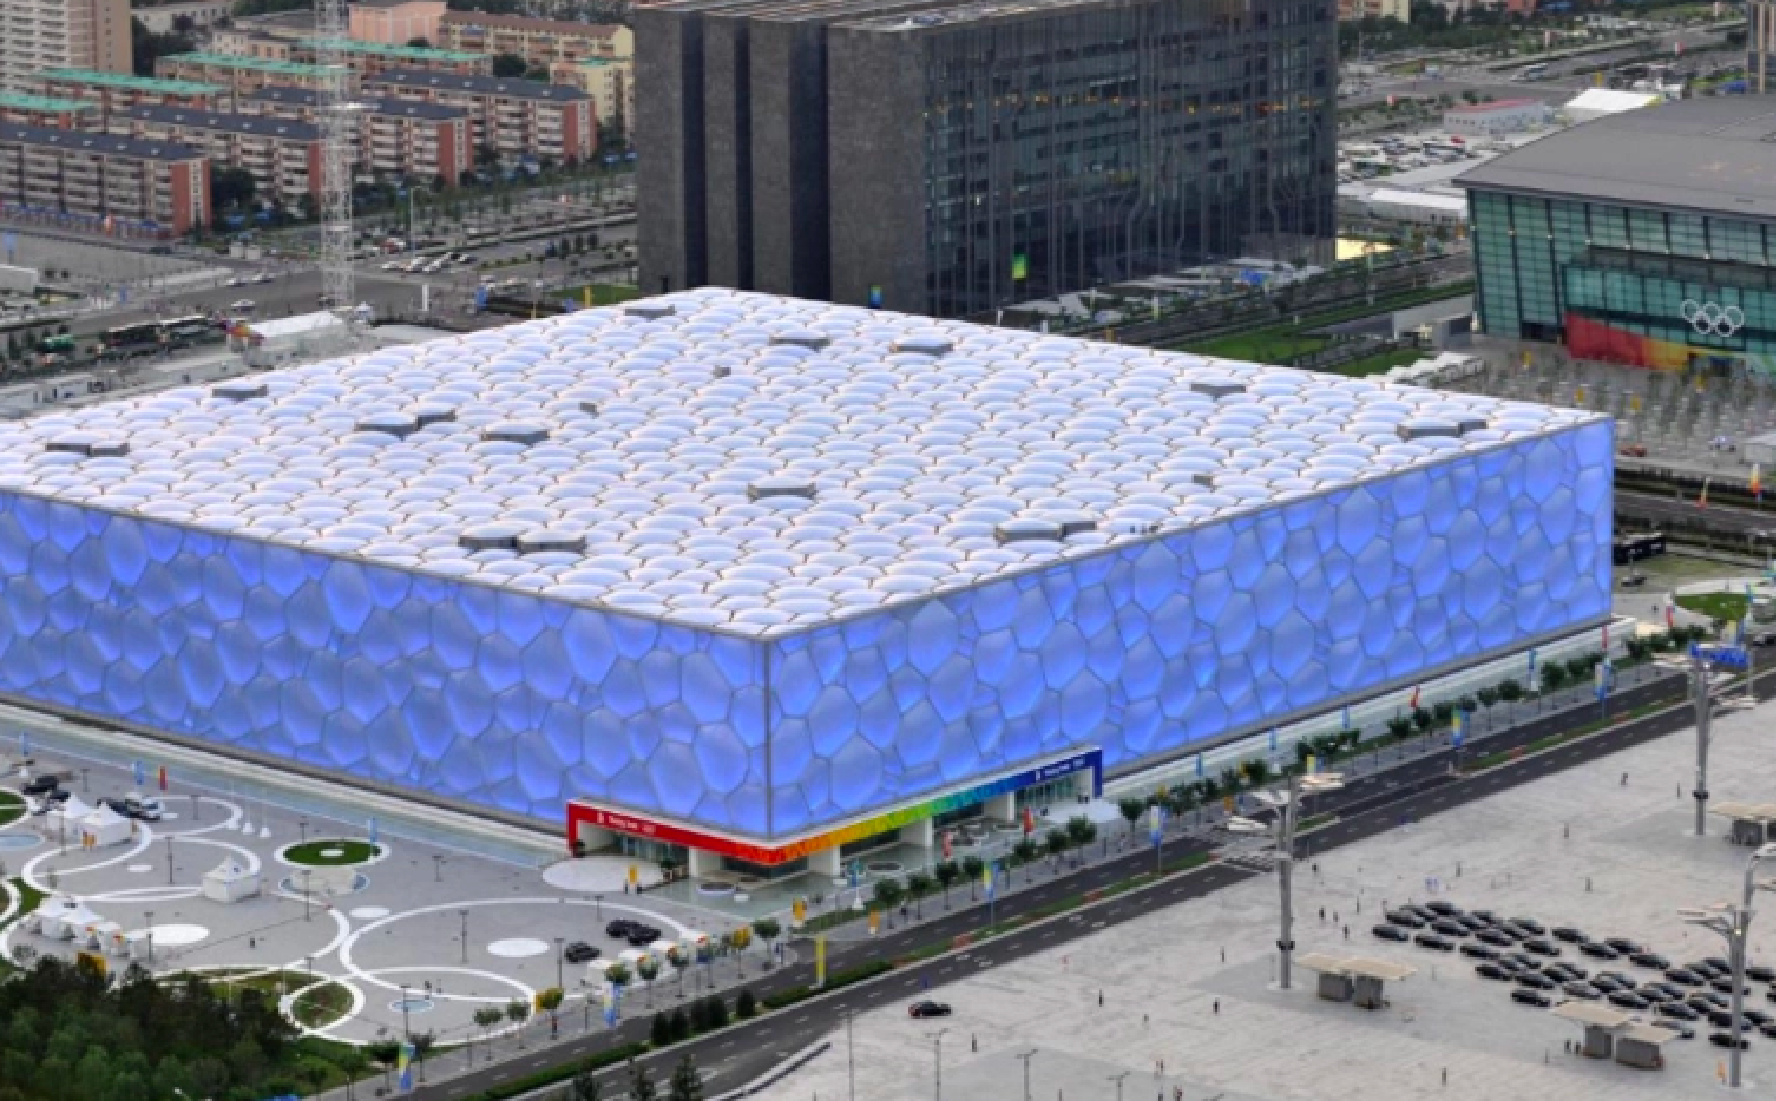 Winter Olympics Water Cube Building